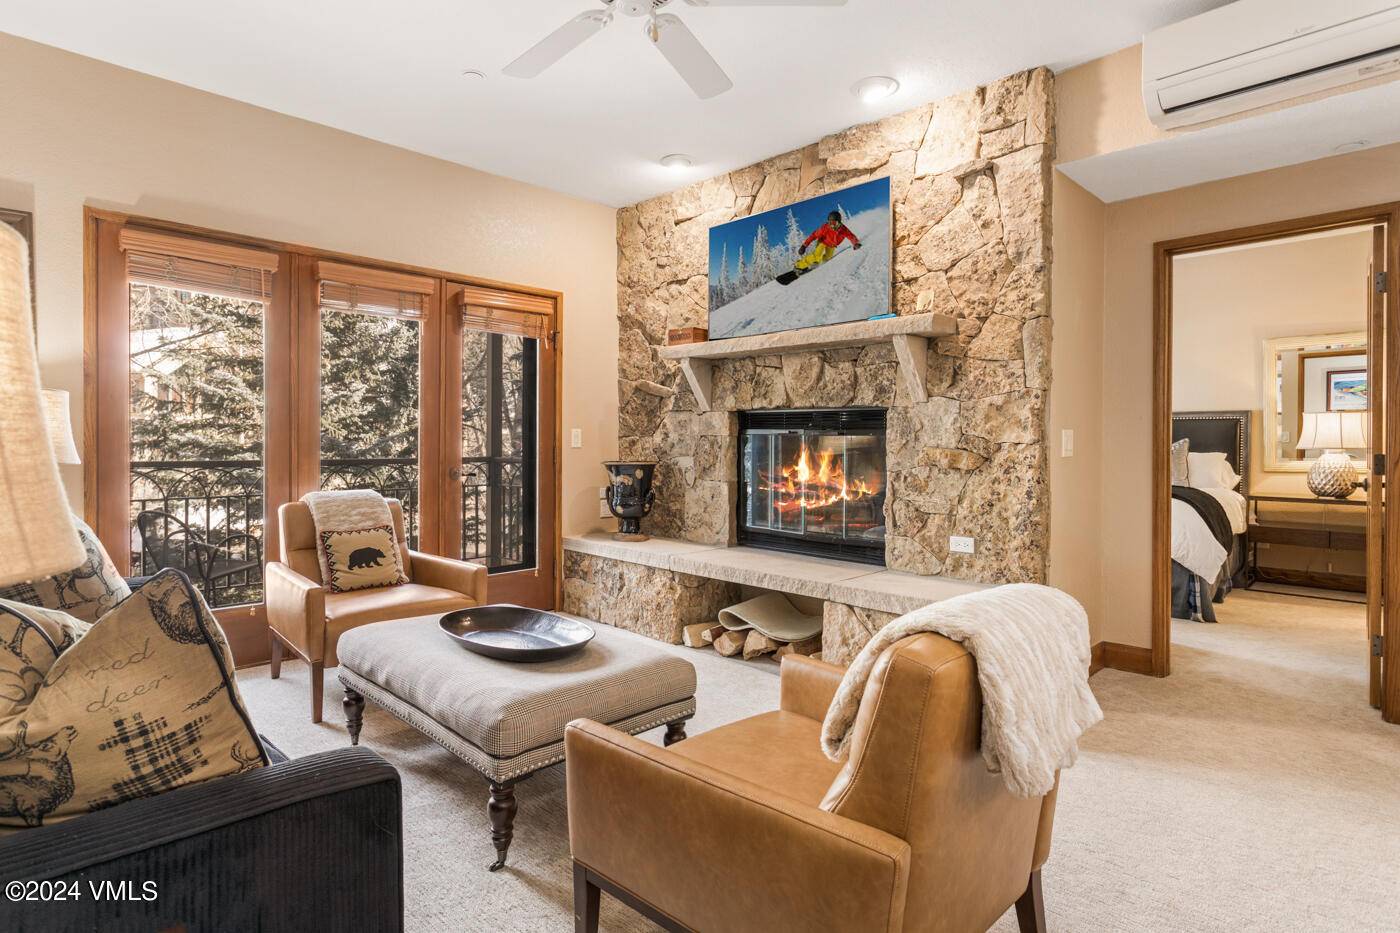 This nicely appointed and finished two bedroom Beaver Creek Charter condo features lock off capabilities along with an extra bathroom for excellent rental flexibility.